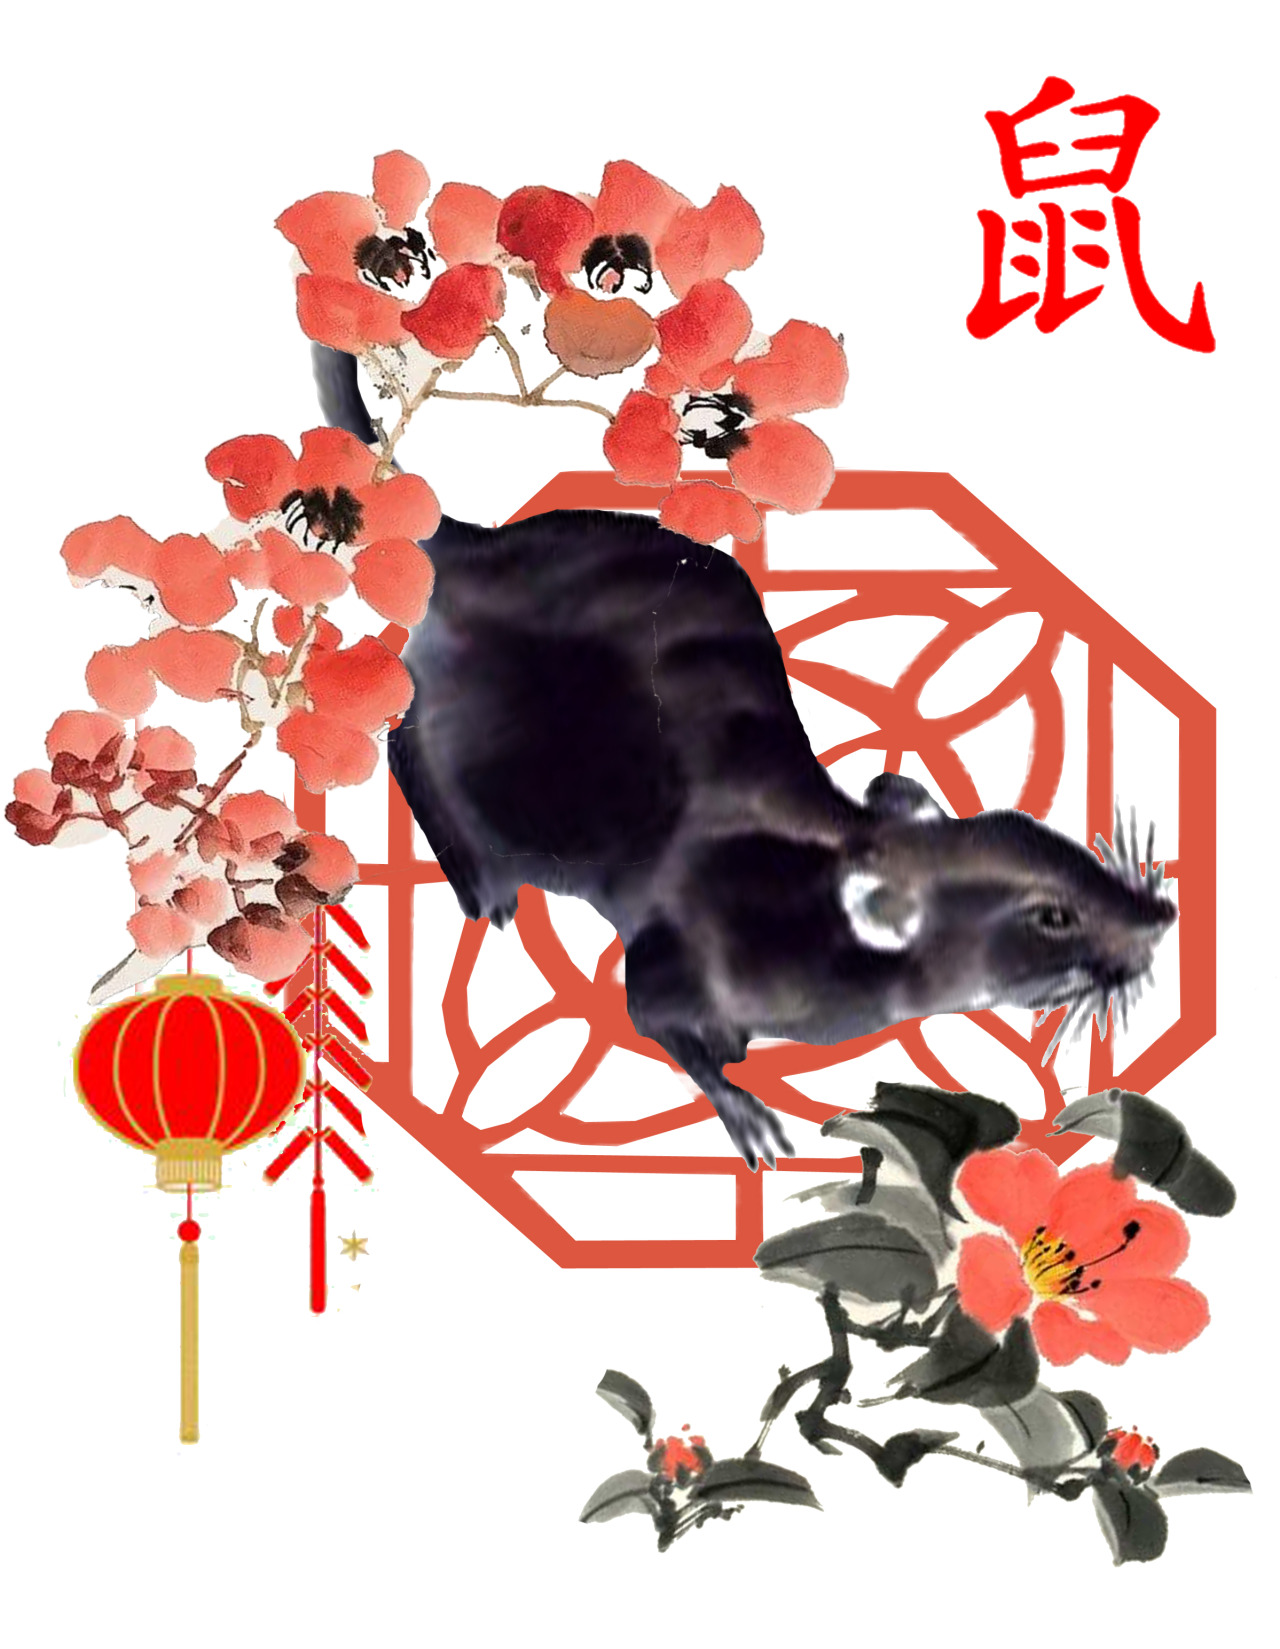 Omelette Du Collage A Small Series I Ve Been Working On To Celebrate The Lunar Year Inspired